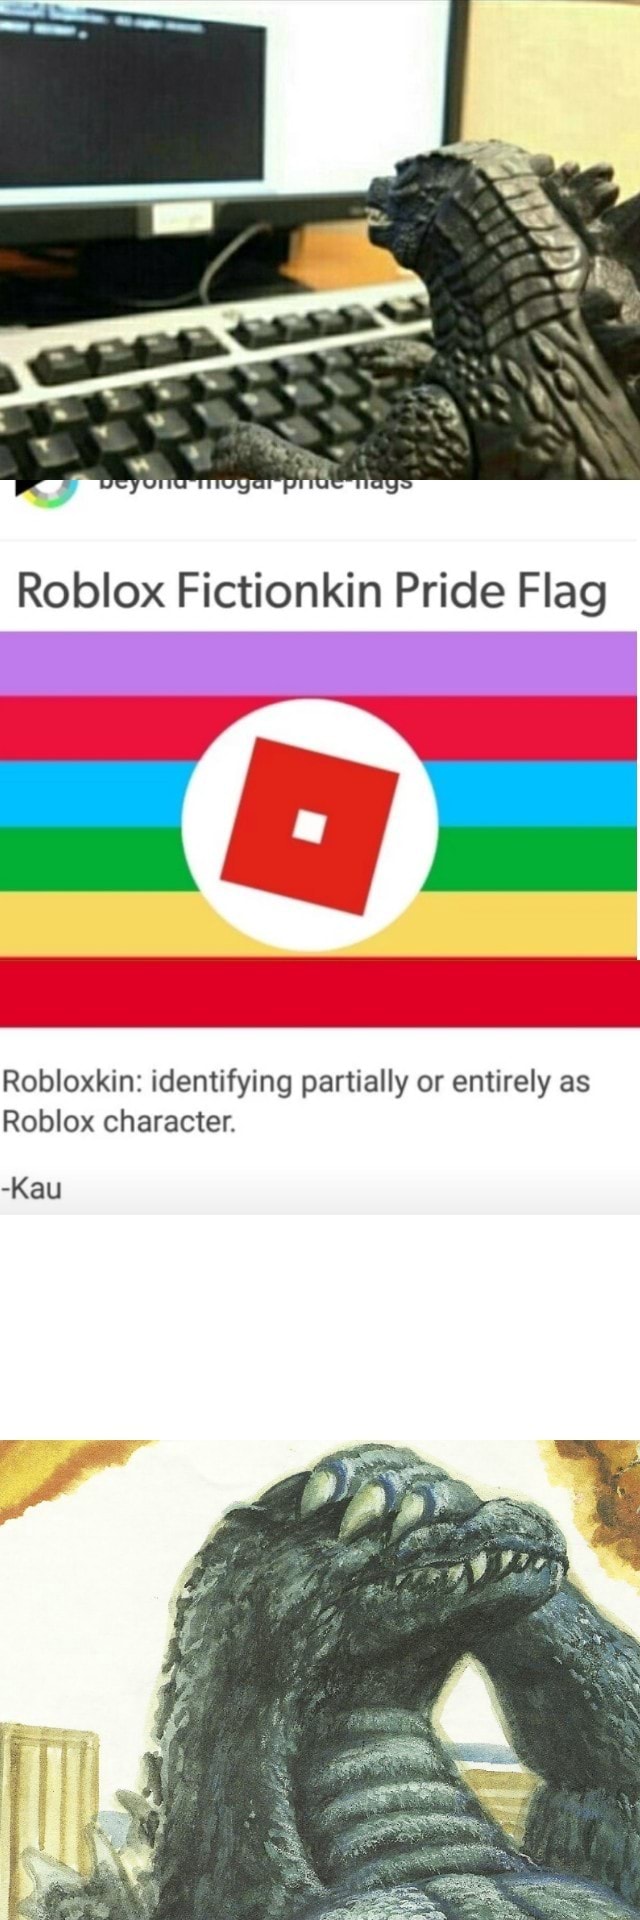 Roblox Fictionkin Pride Flag Robloxkin Identifying Partially Or Entirely As Roblox Character - roblox pride song